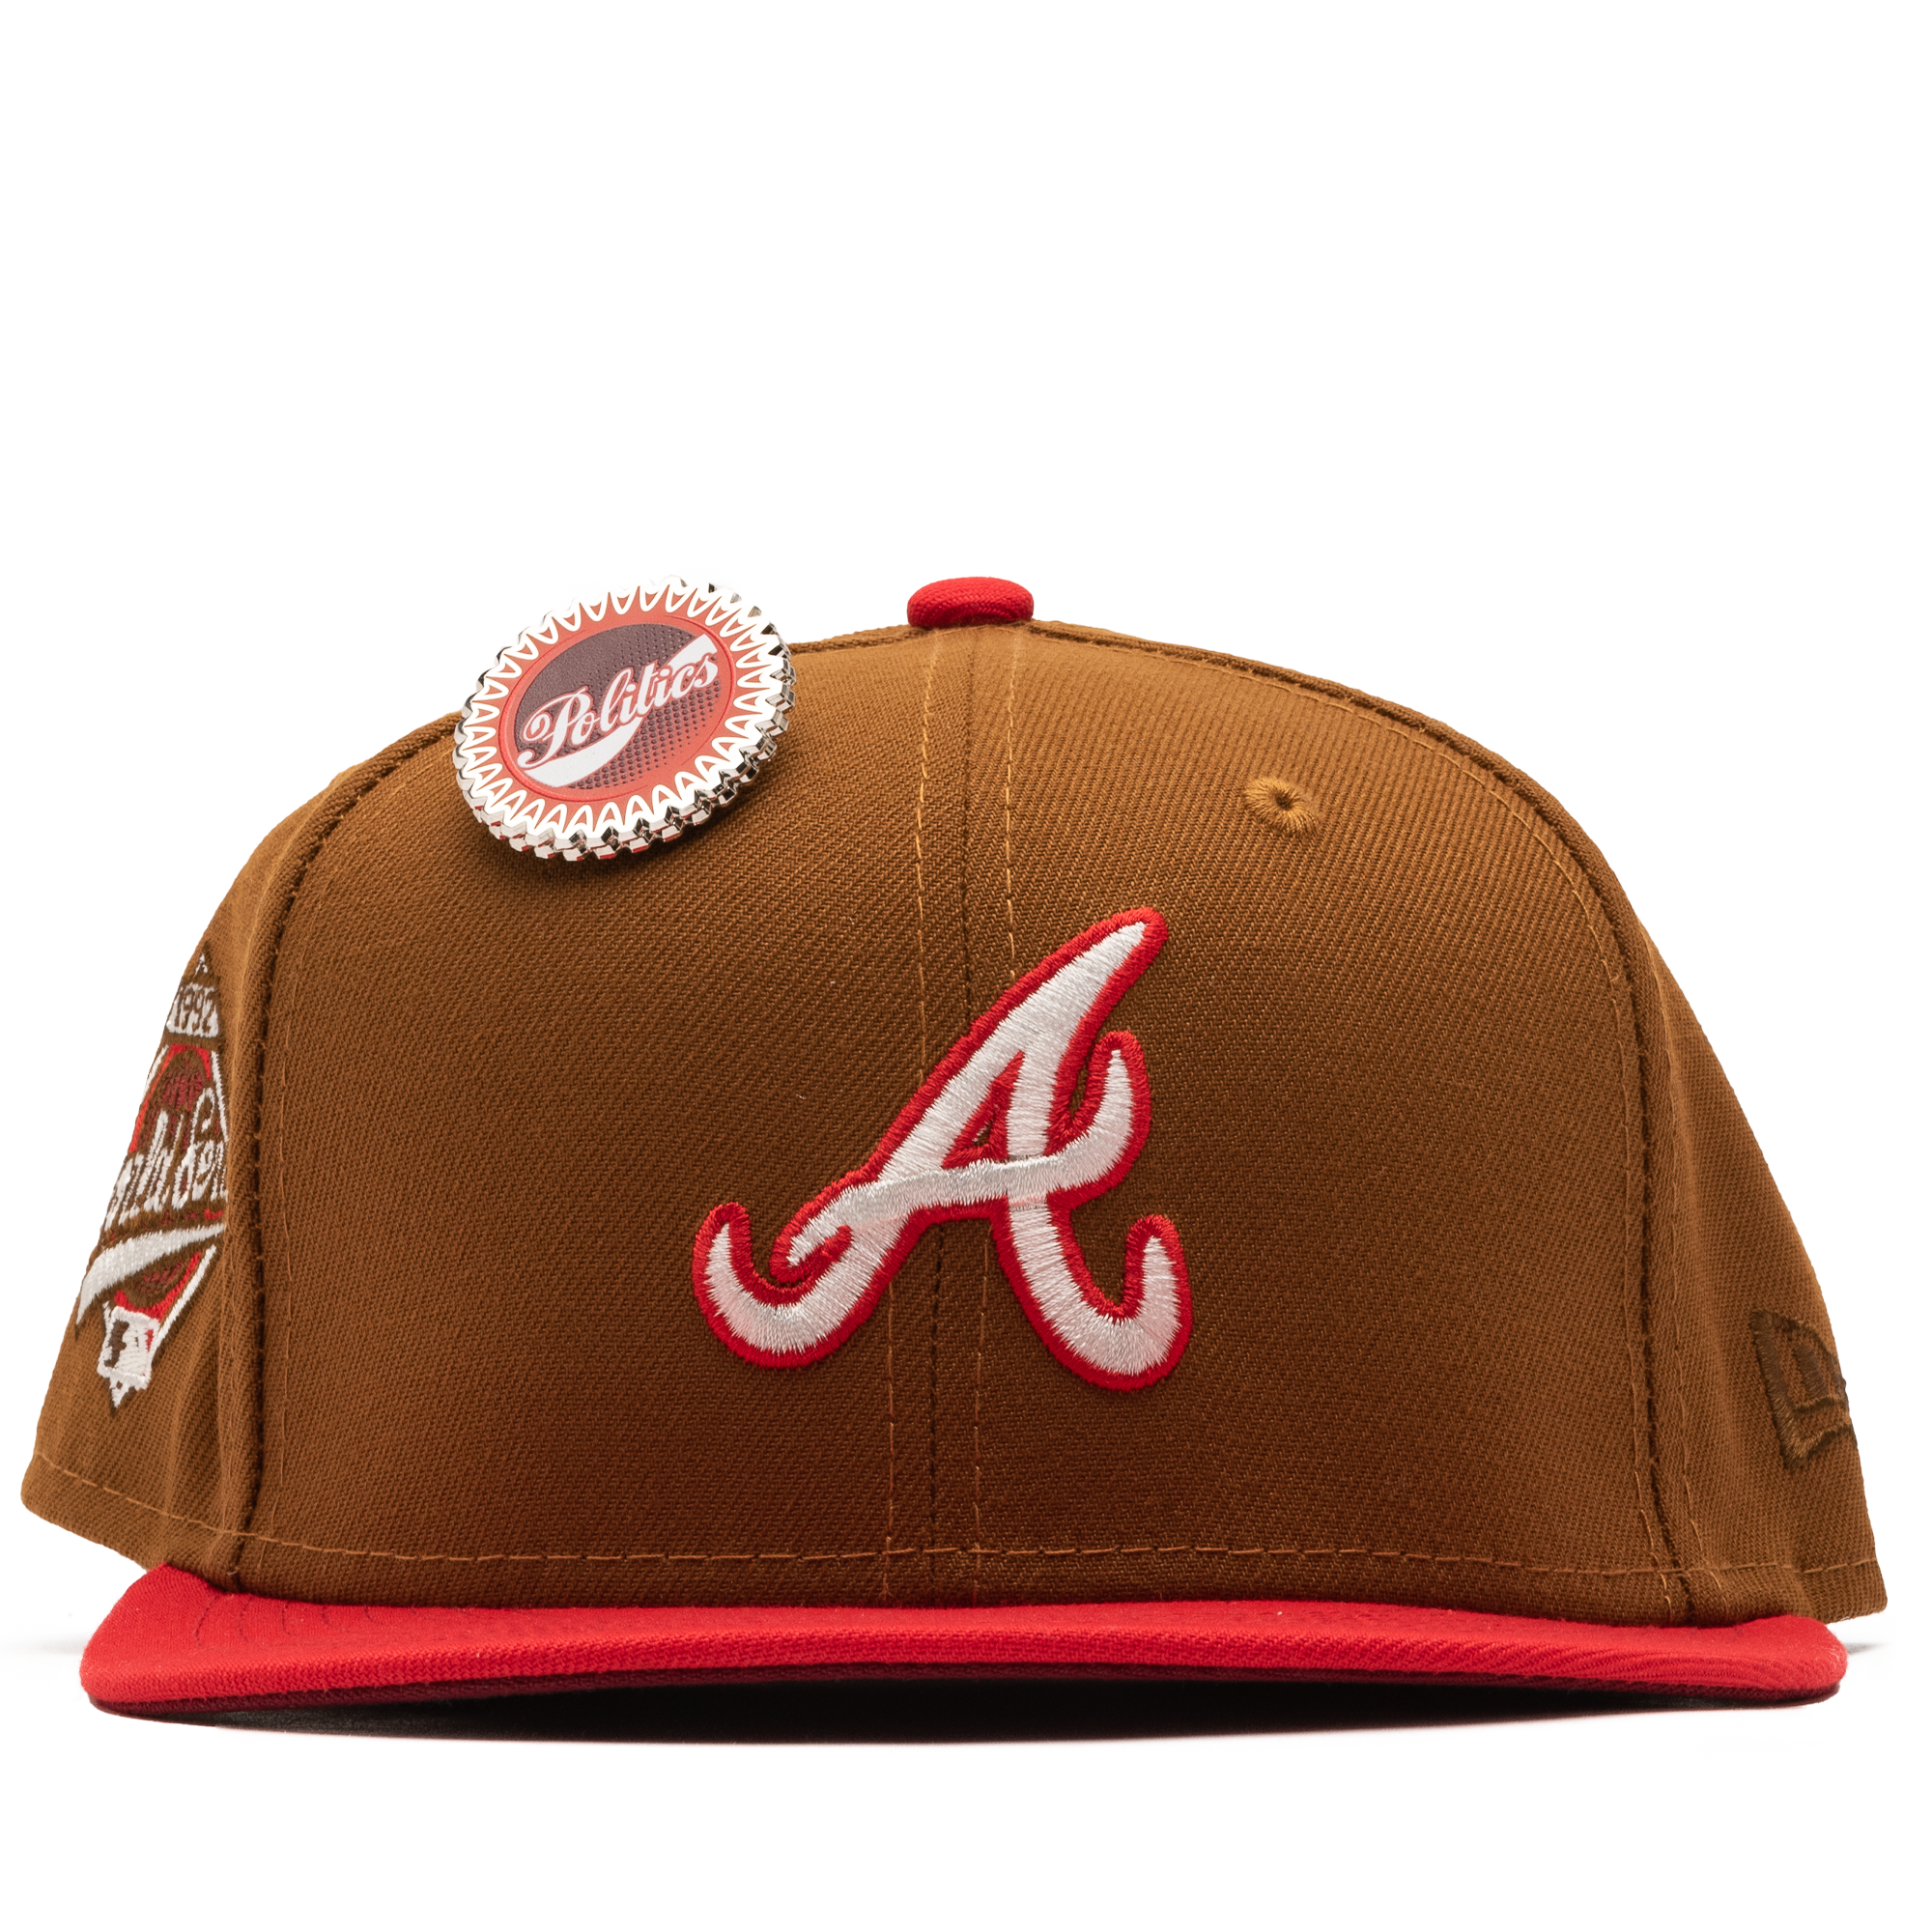 New Era x Politics Atlanta Braves 59FIFTY Fitted Hat - Black/Red, Size 7 1/8 by Sneaker Politics